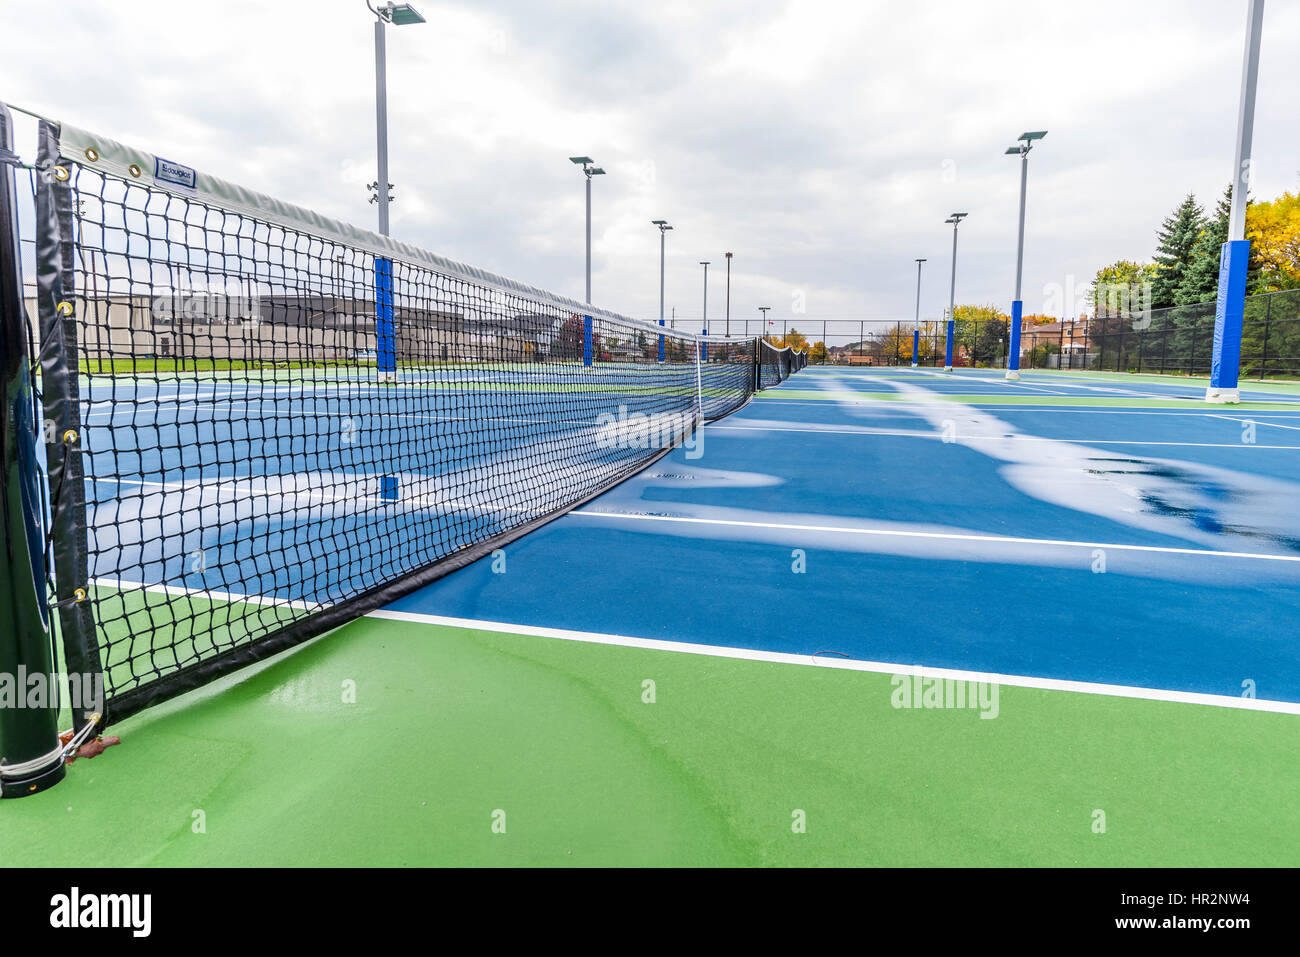 Looking down the nets across the many tennis courts wet after a rain shower in Stouffville Ontario Canada. Stock Photo